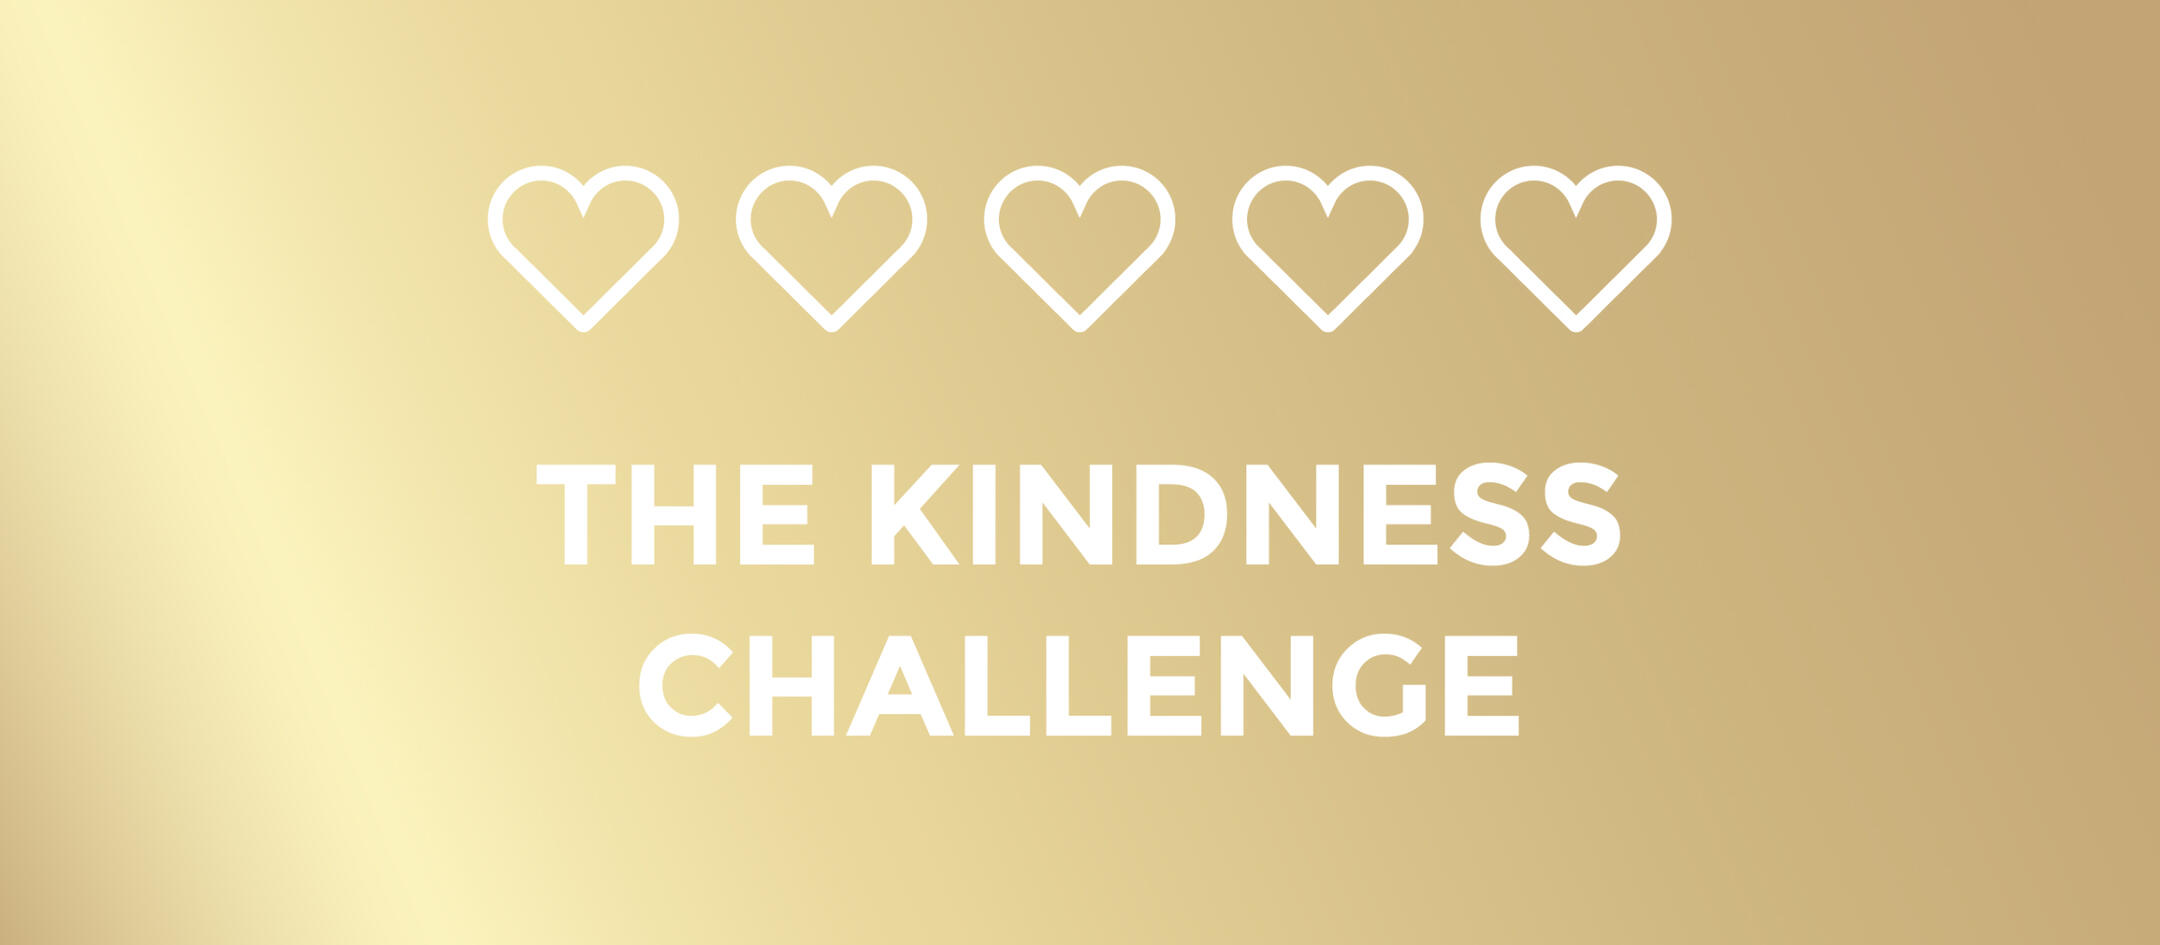 A game on a mission to create a culture of kindness with no agenda